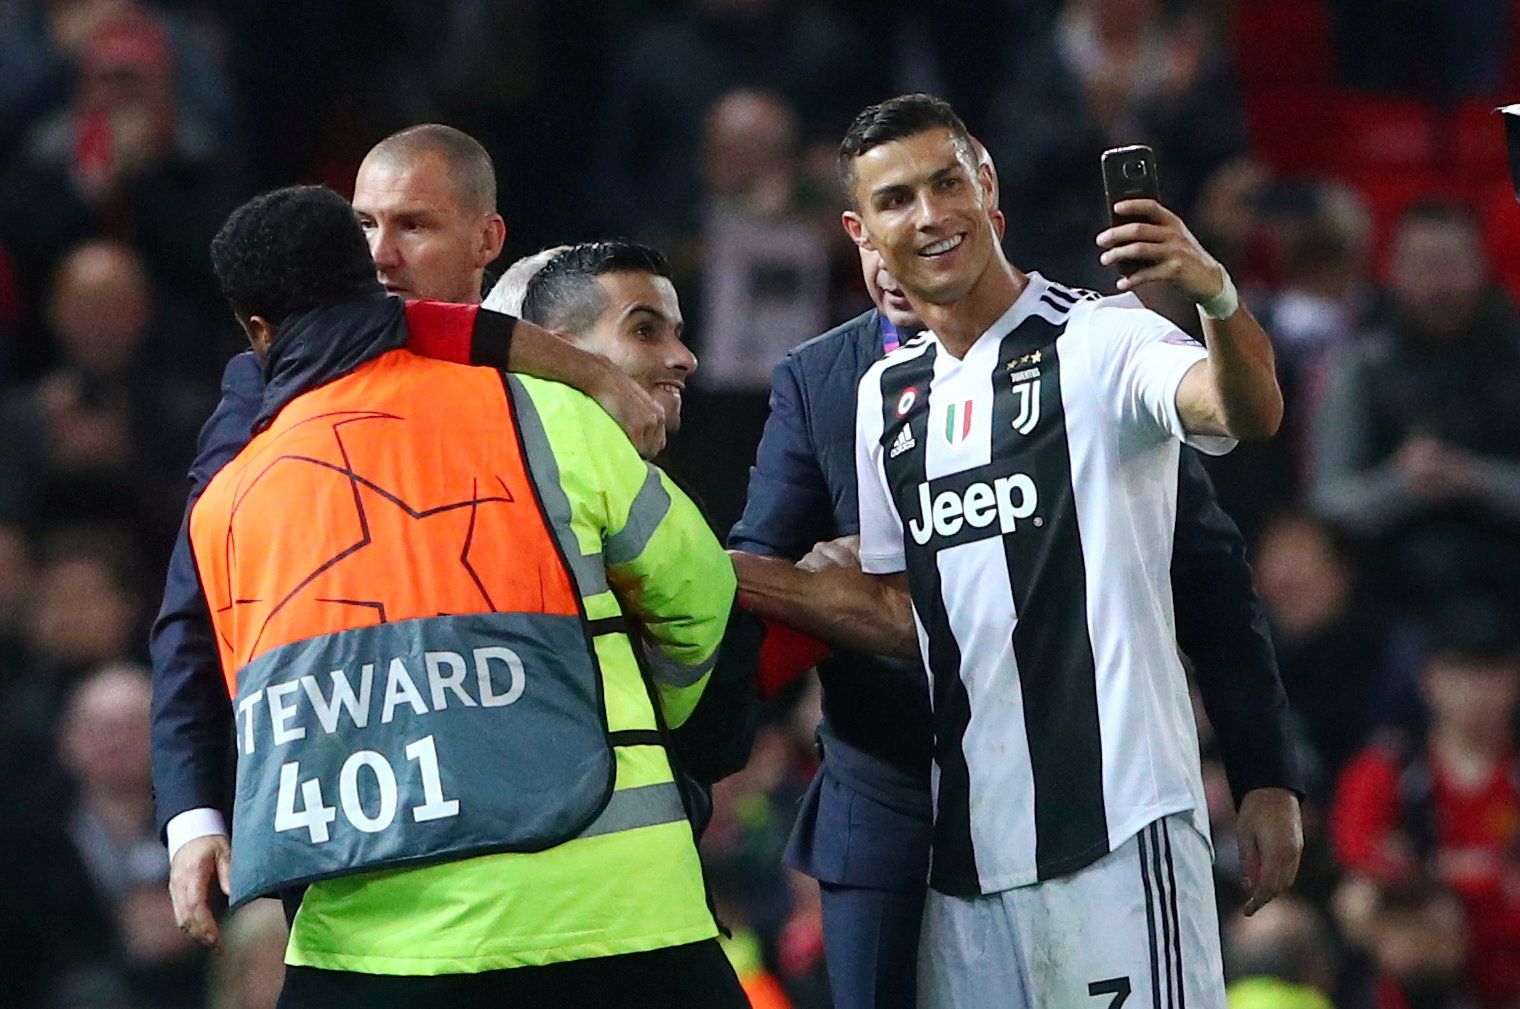 Soccer Football - Champions League - Group Stage - Group H - Manchester United v Juventus - Old Trafford, Manchester, Britain - October 23, 2018  Juventus' Cristiano Ronaldo takes a selfie as stewards apprehend a pitch invader after the match               REUTERS/Hannah McKay     TPX IMAGES OF THE DAY